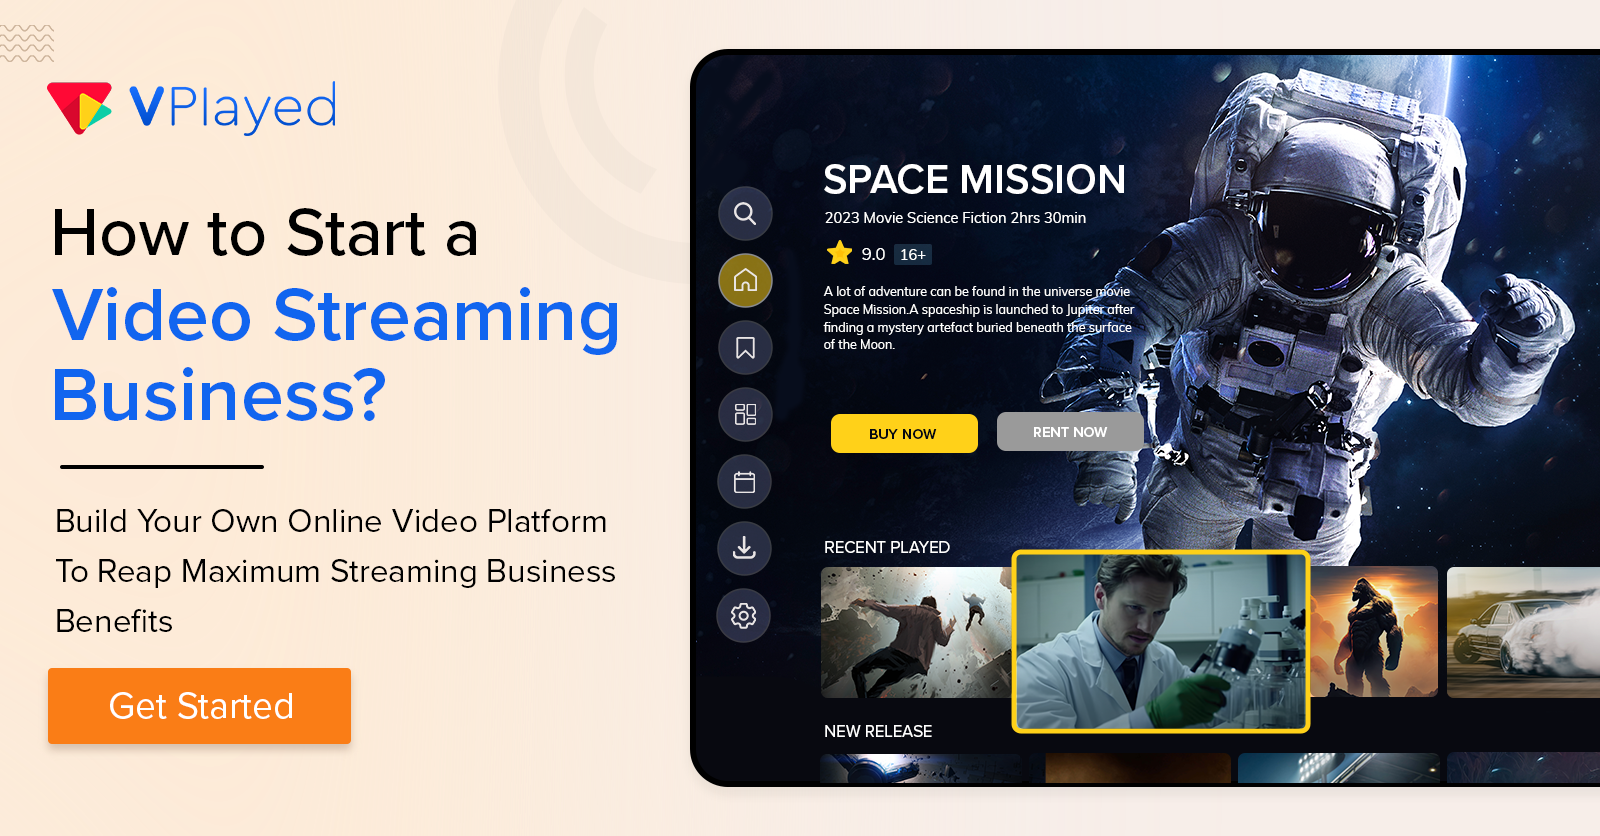 How To Start a Video Streaming Business in 2023?